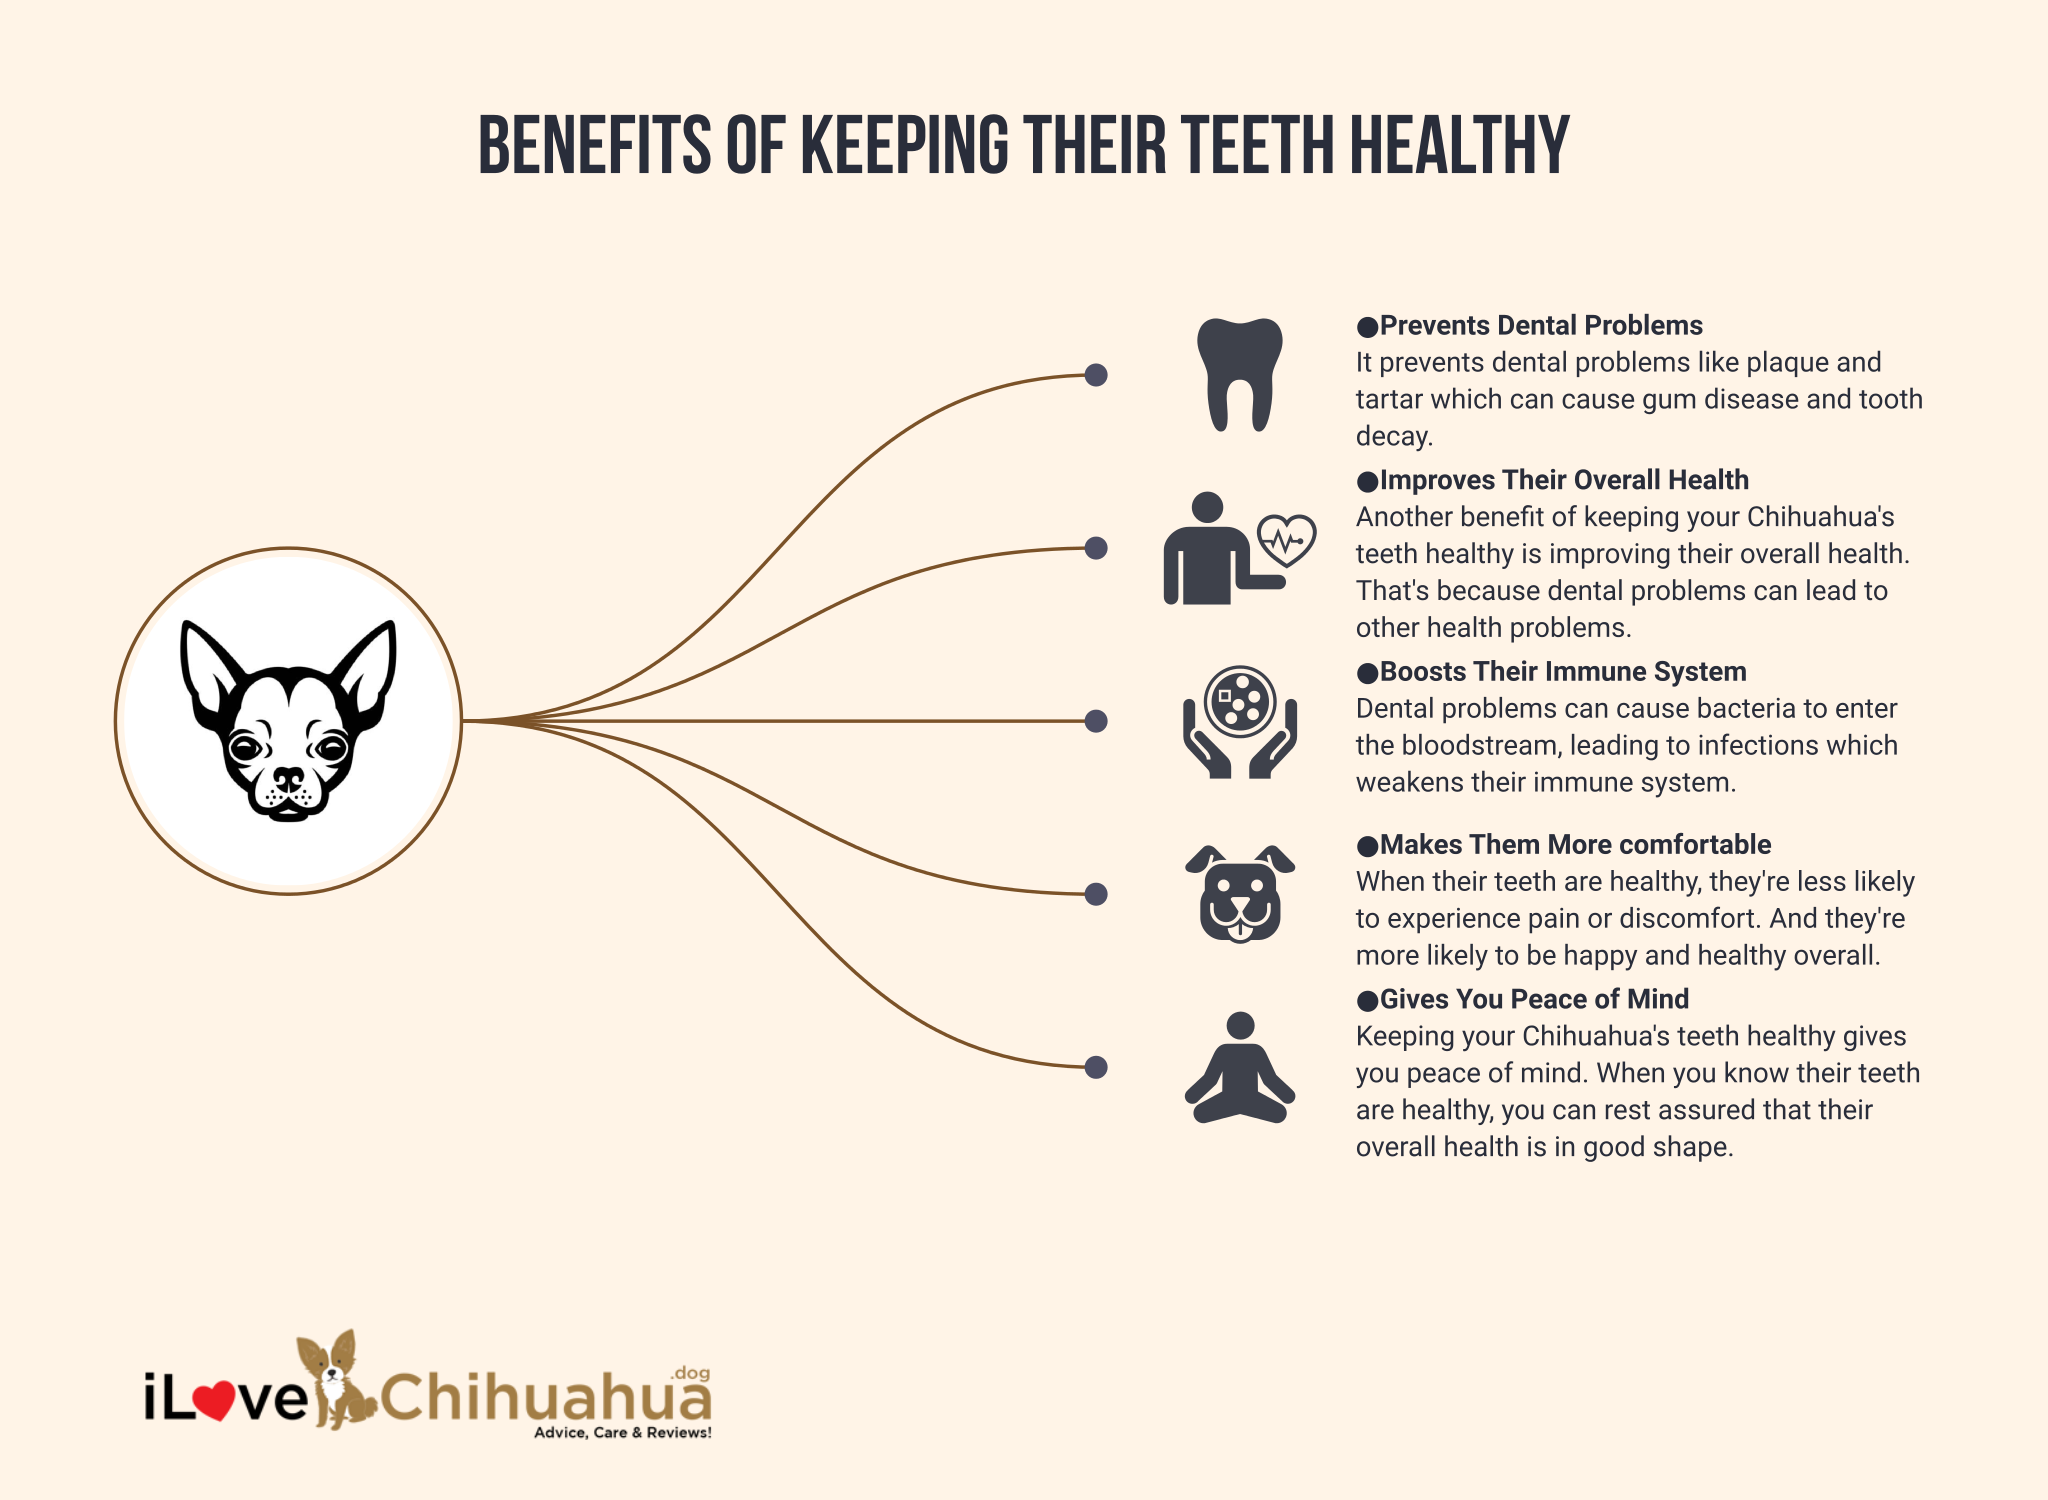 Top Benefits of Keeping Your Chihuahua's Teeth Healthy